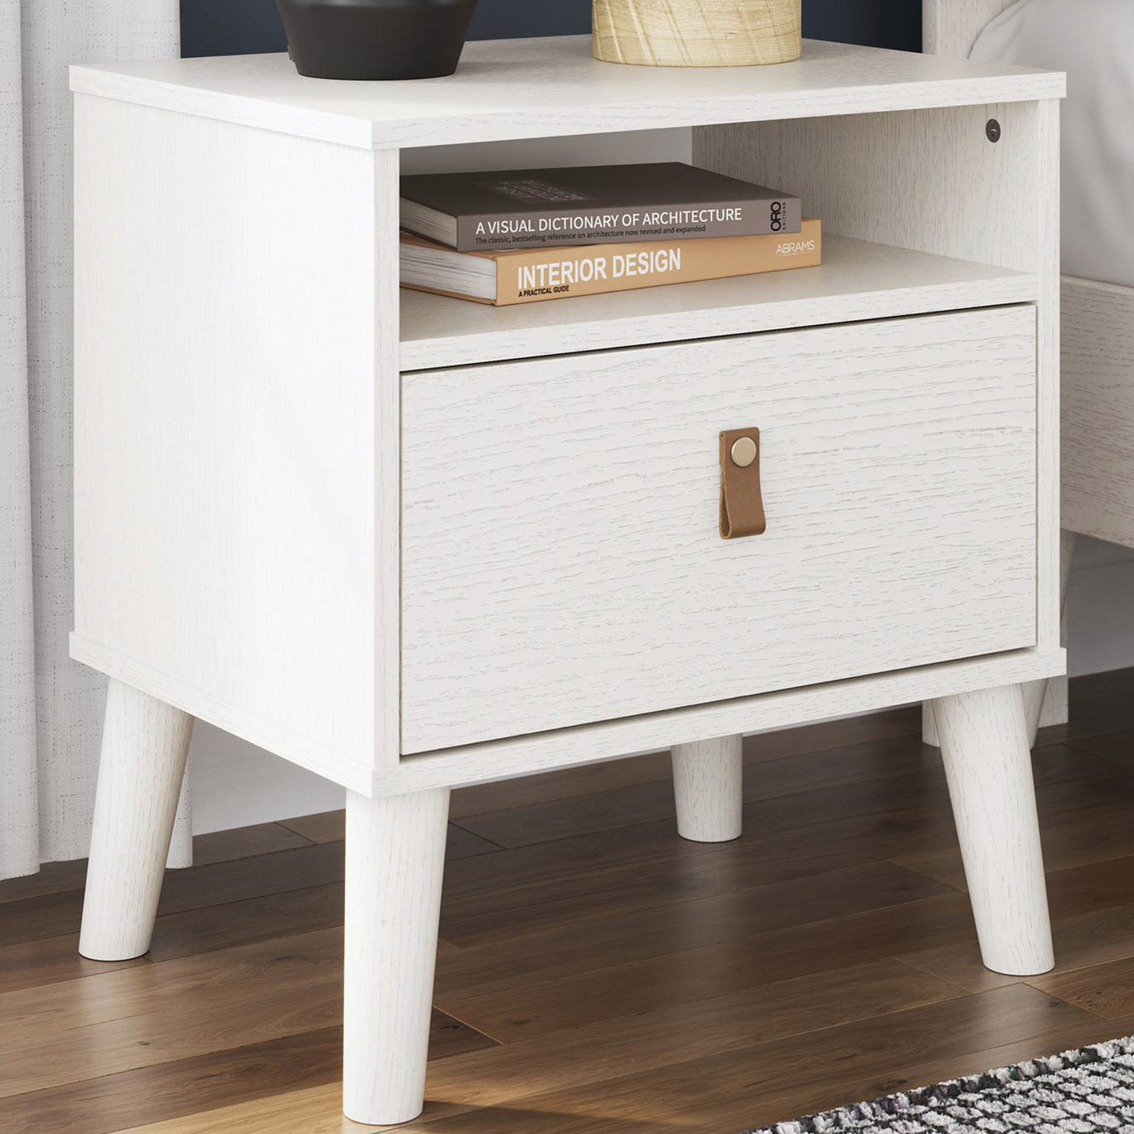 Signature Design by Ashley Aprilyn RTA Nightstand - Image 5 of 6